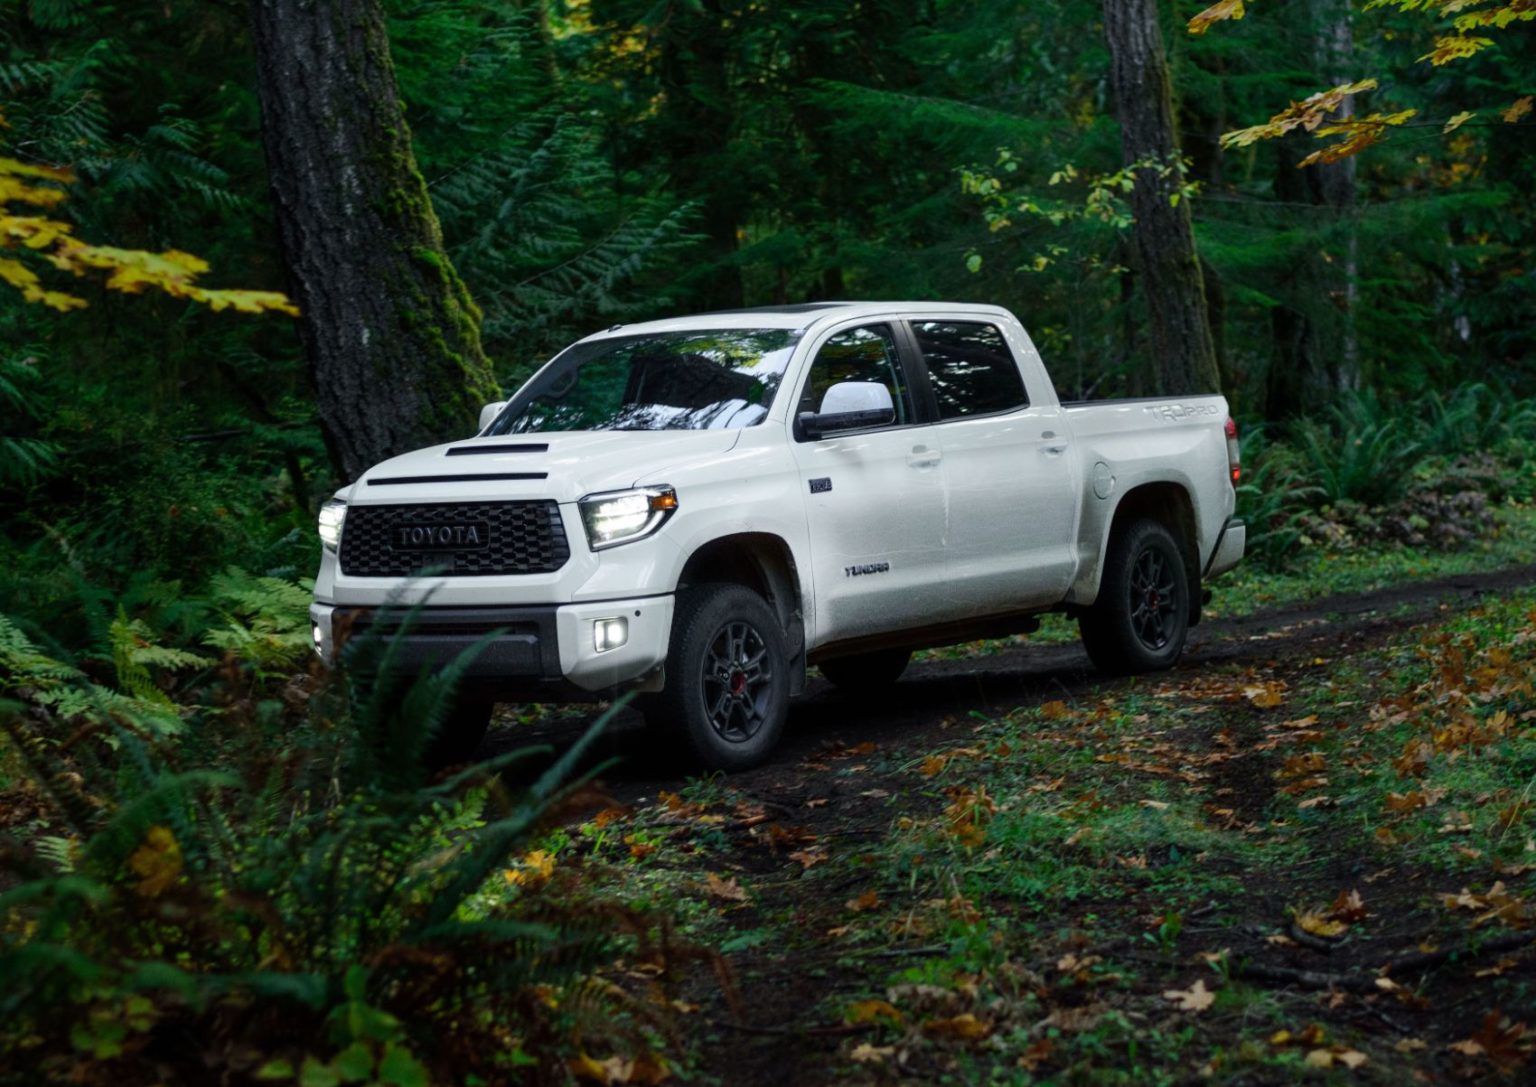 2020 Toyota Tundra TRD Pro Review: Nice But Not The Best Truck Today